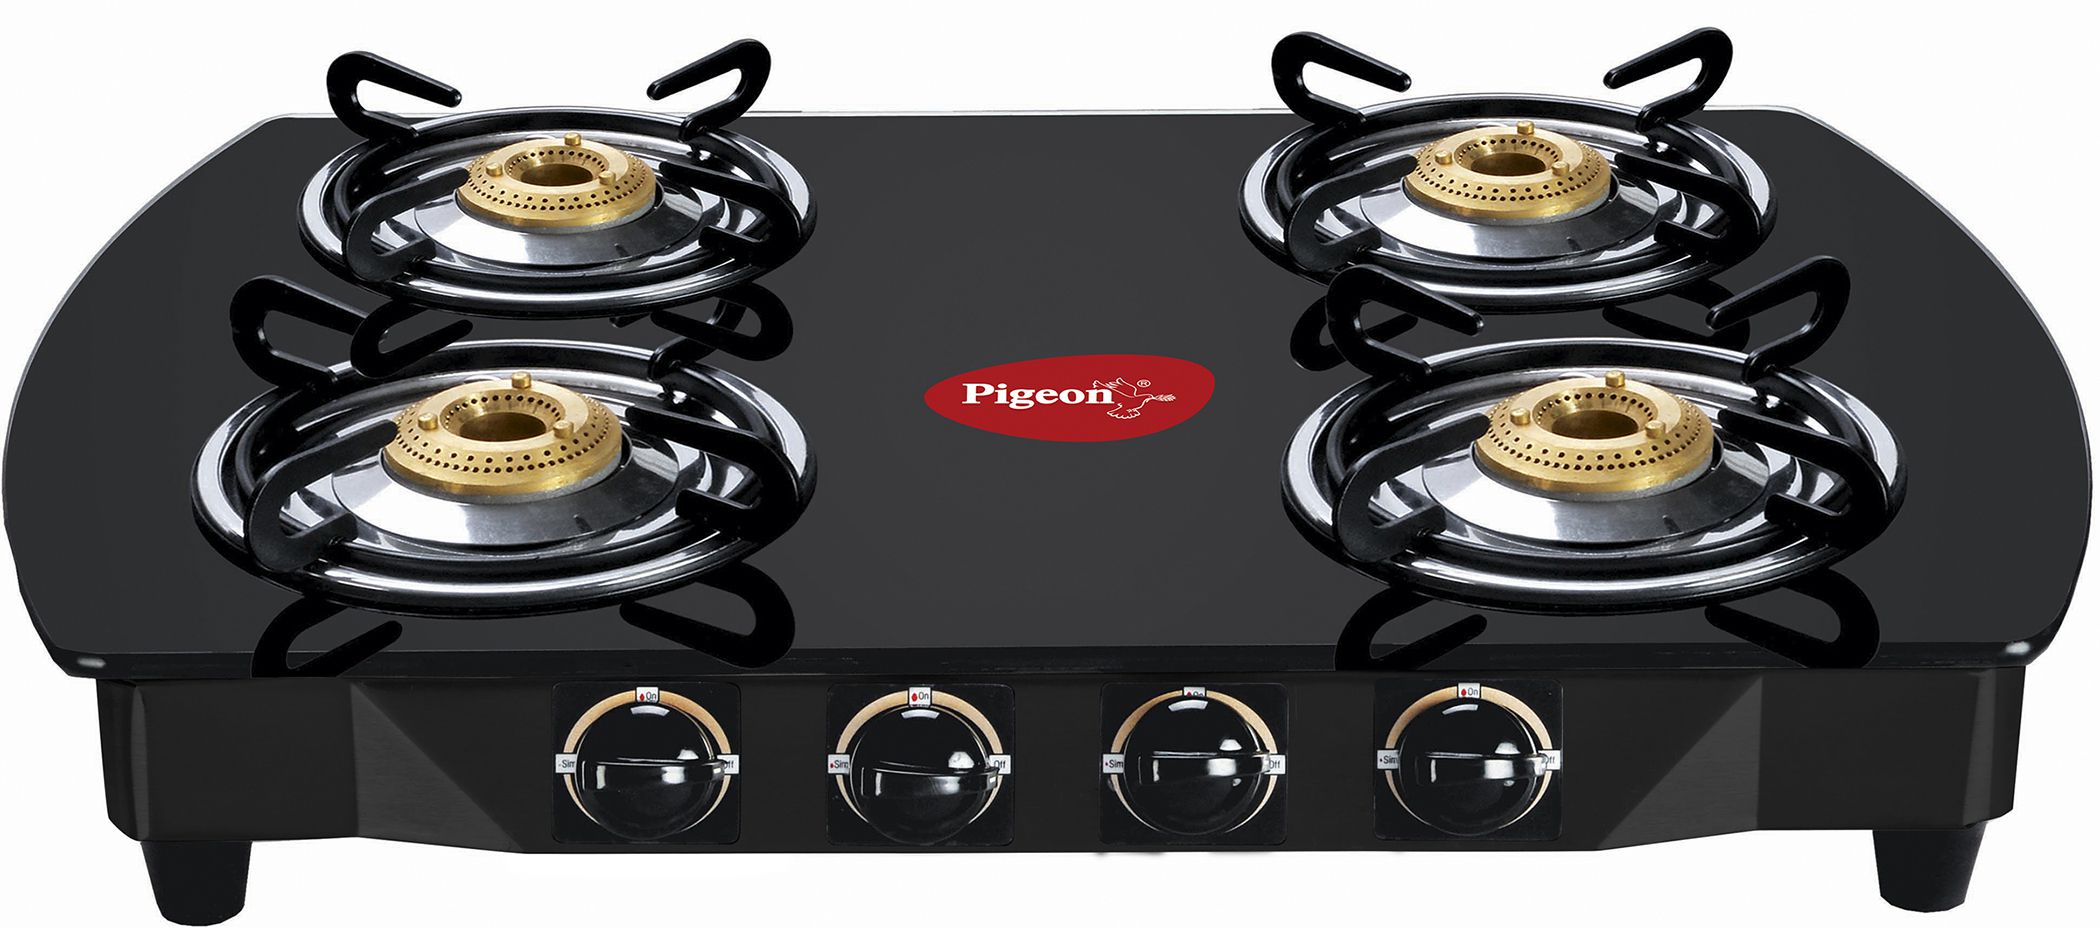 Details about   Pigeon Favourite 4 Brass Burner Gas Stove Toughened Glass Top Black Spill Proof 